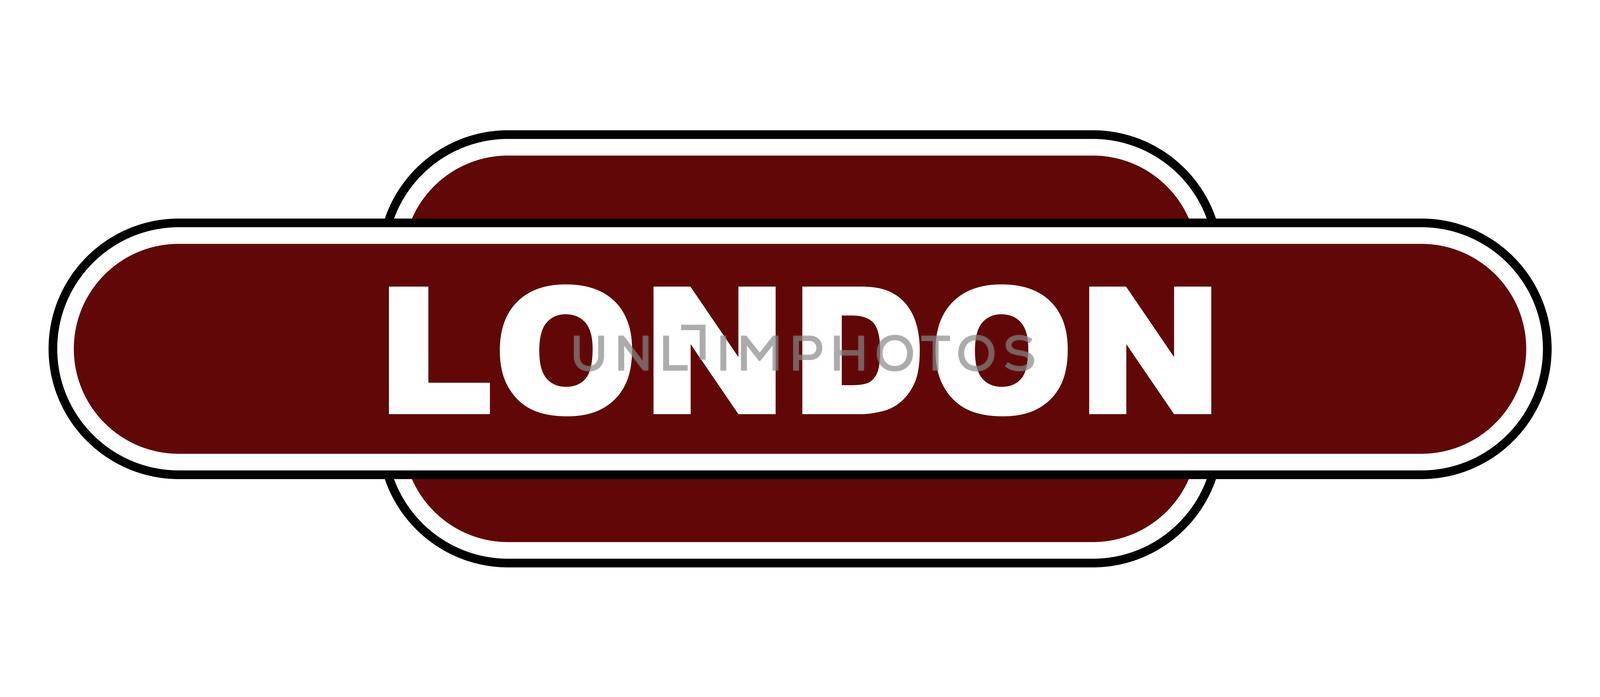 A London UK station name plate over a white background